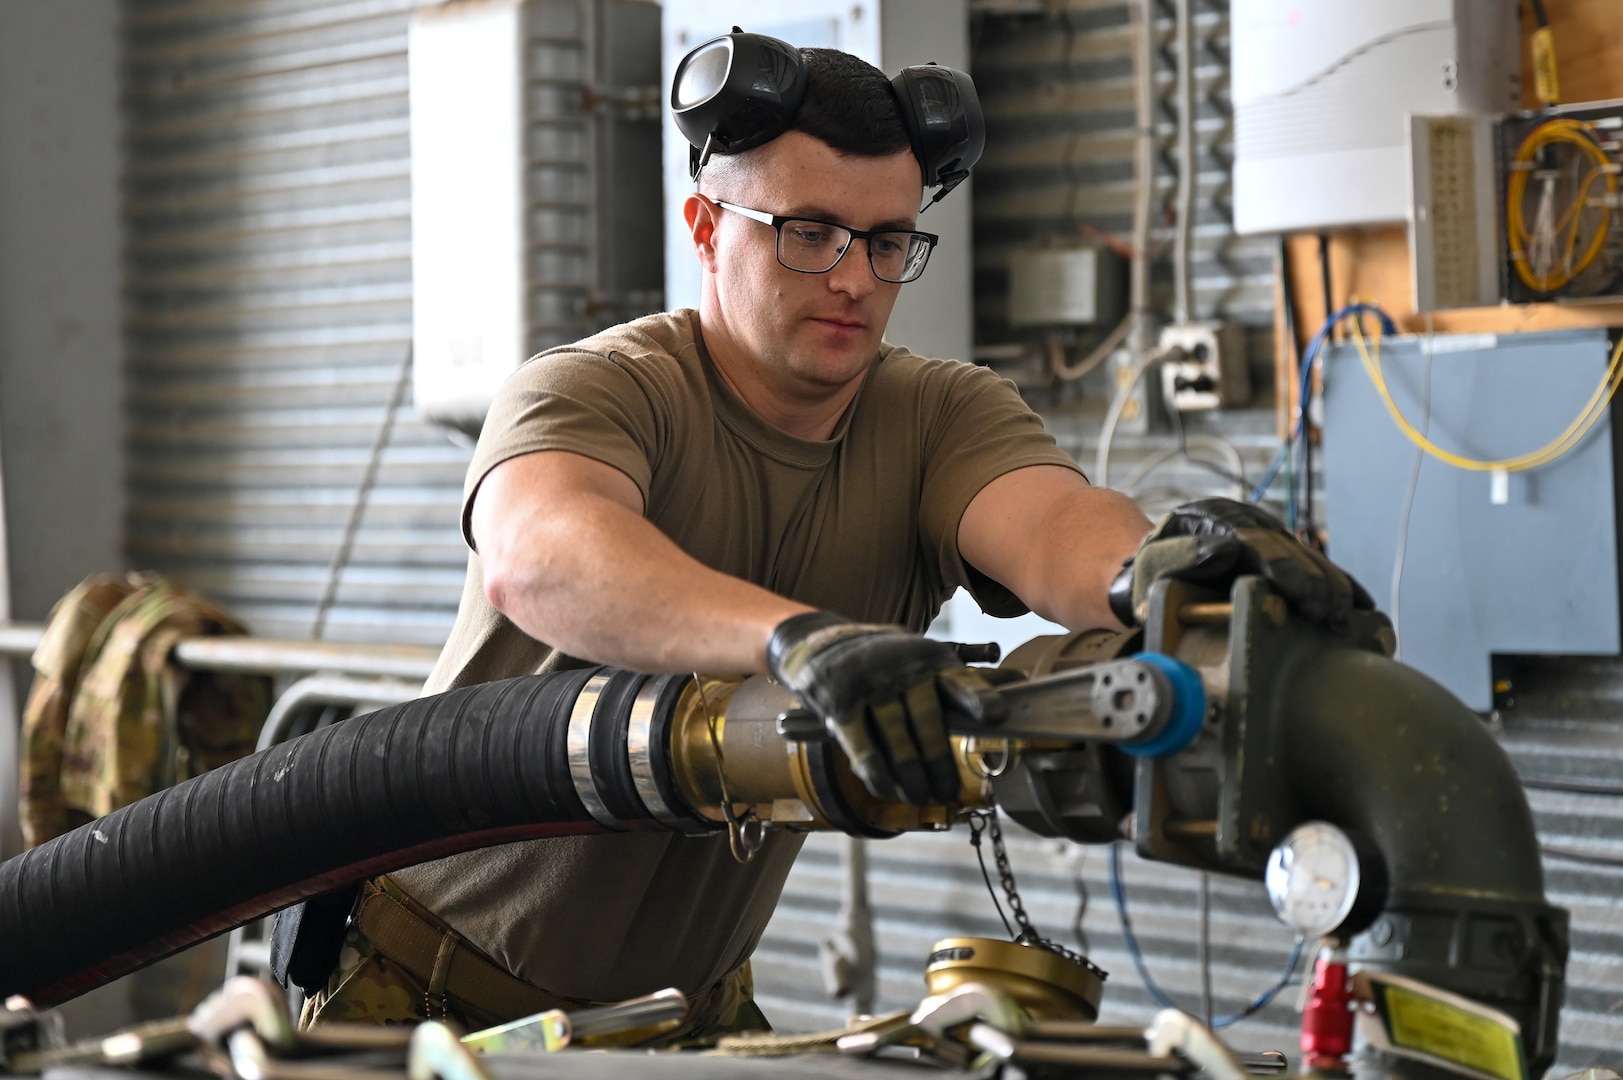 U.S. Air Force Staff Sgt. Christopher Stollings, 436th Logistics Readiness Squadron NCO in charge of fuels distribution, prepares to load fuel into an Aerial Bulk Fuel Delivery System at Alpena Combat Readiness Training Center, Michigan, May 19, 2021. The ABFDS ensures minimal time spent on the ground by expeditiously refueling fighters while keeping engines on. (U.S. Air Force photo by Senior Airman Aaron Irvin)